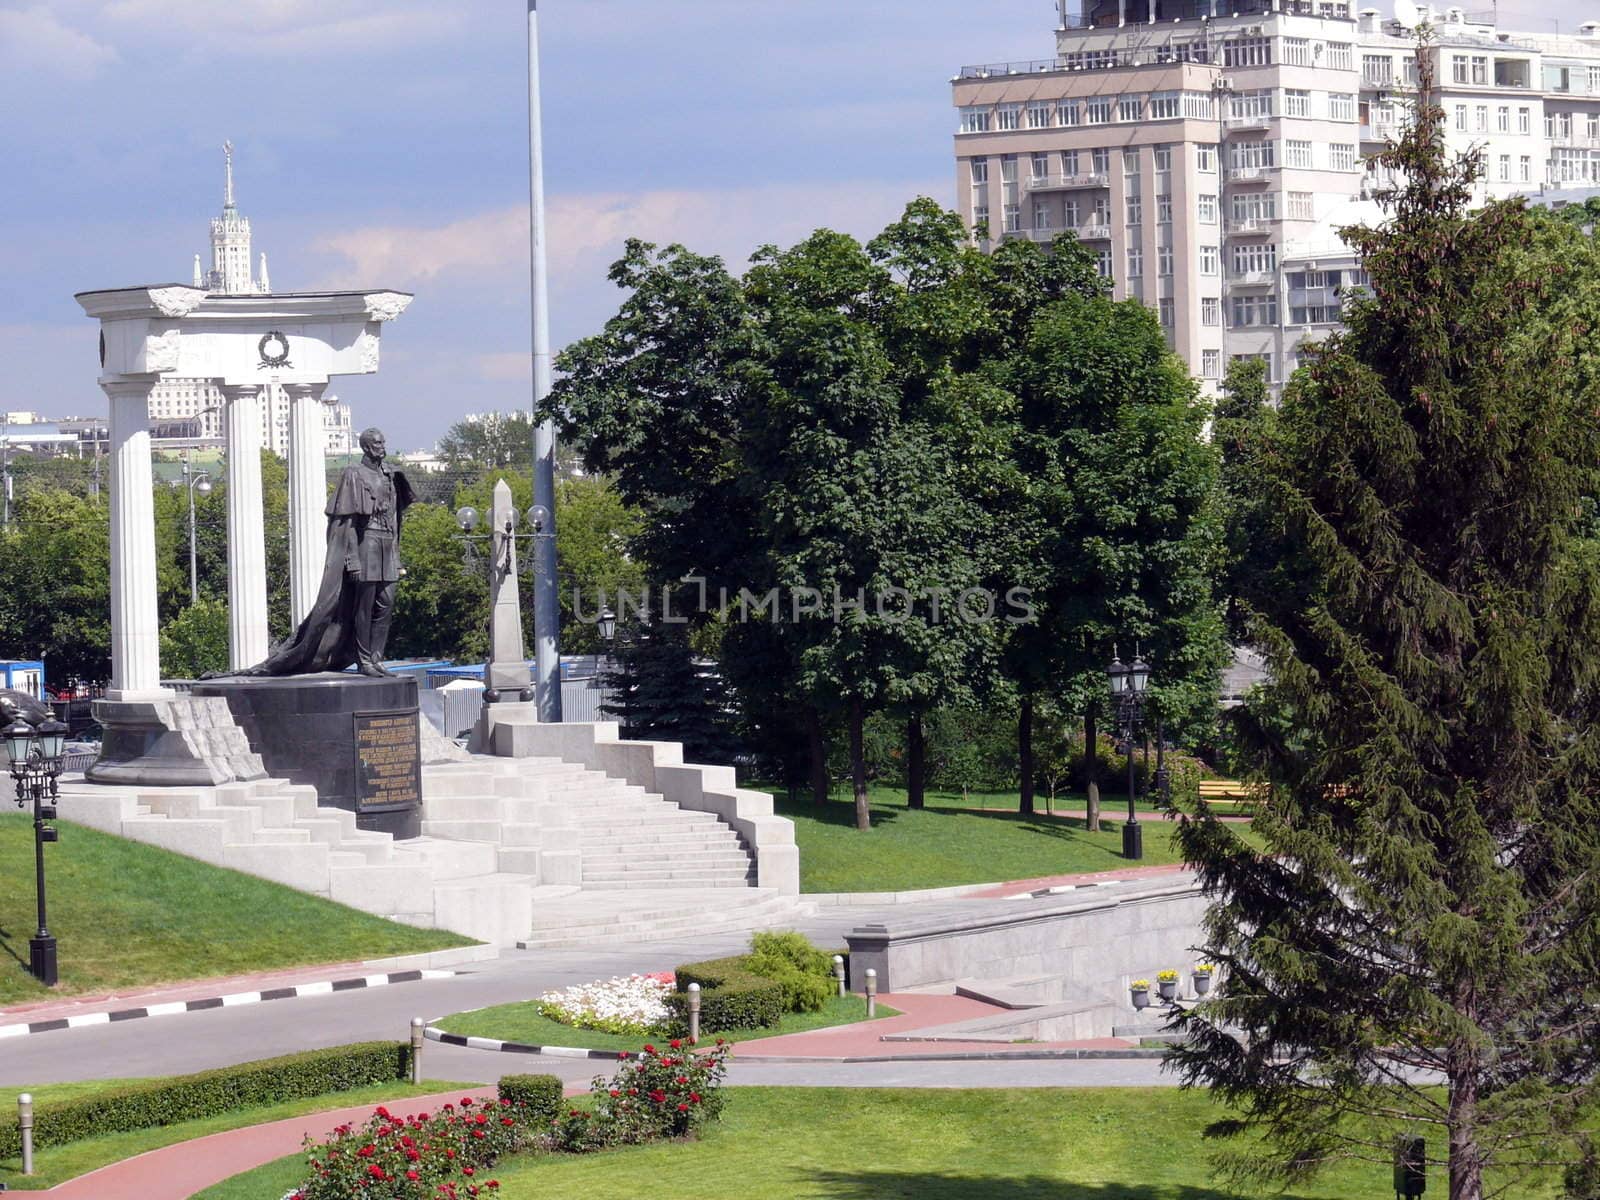 Monument of Alexander the great - Moscow, Russia by Stoyanov